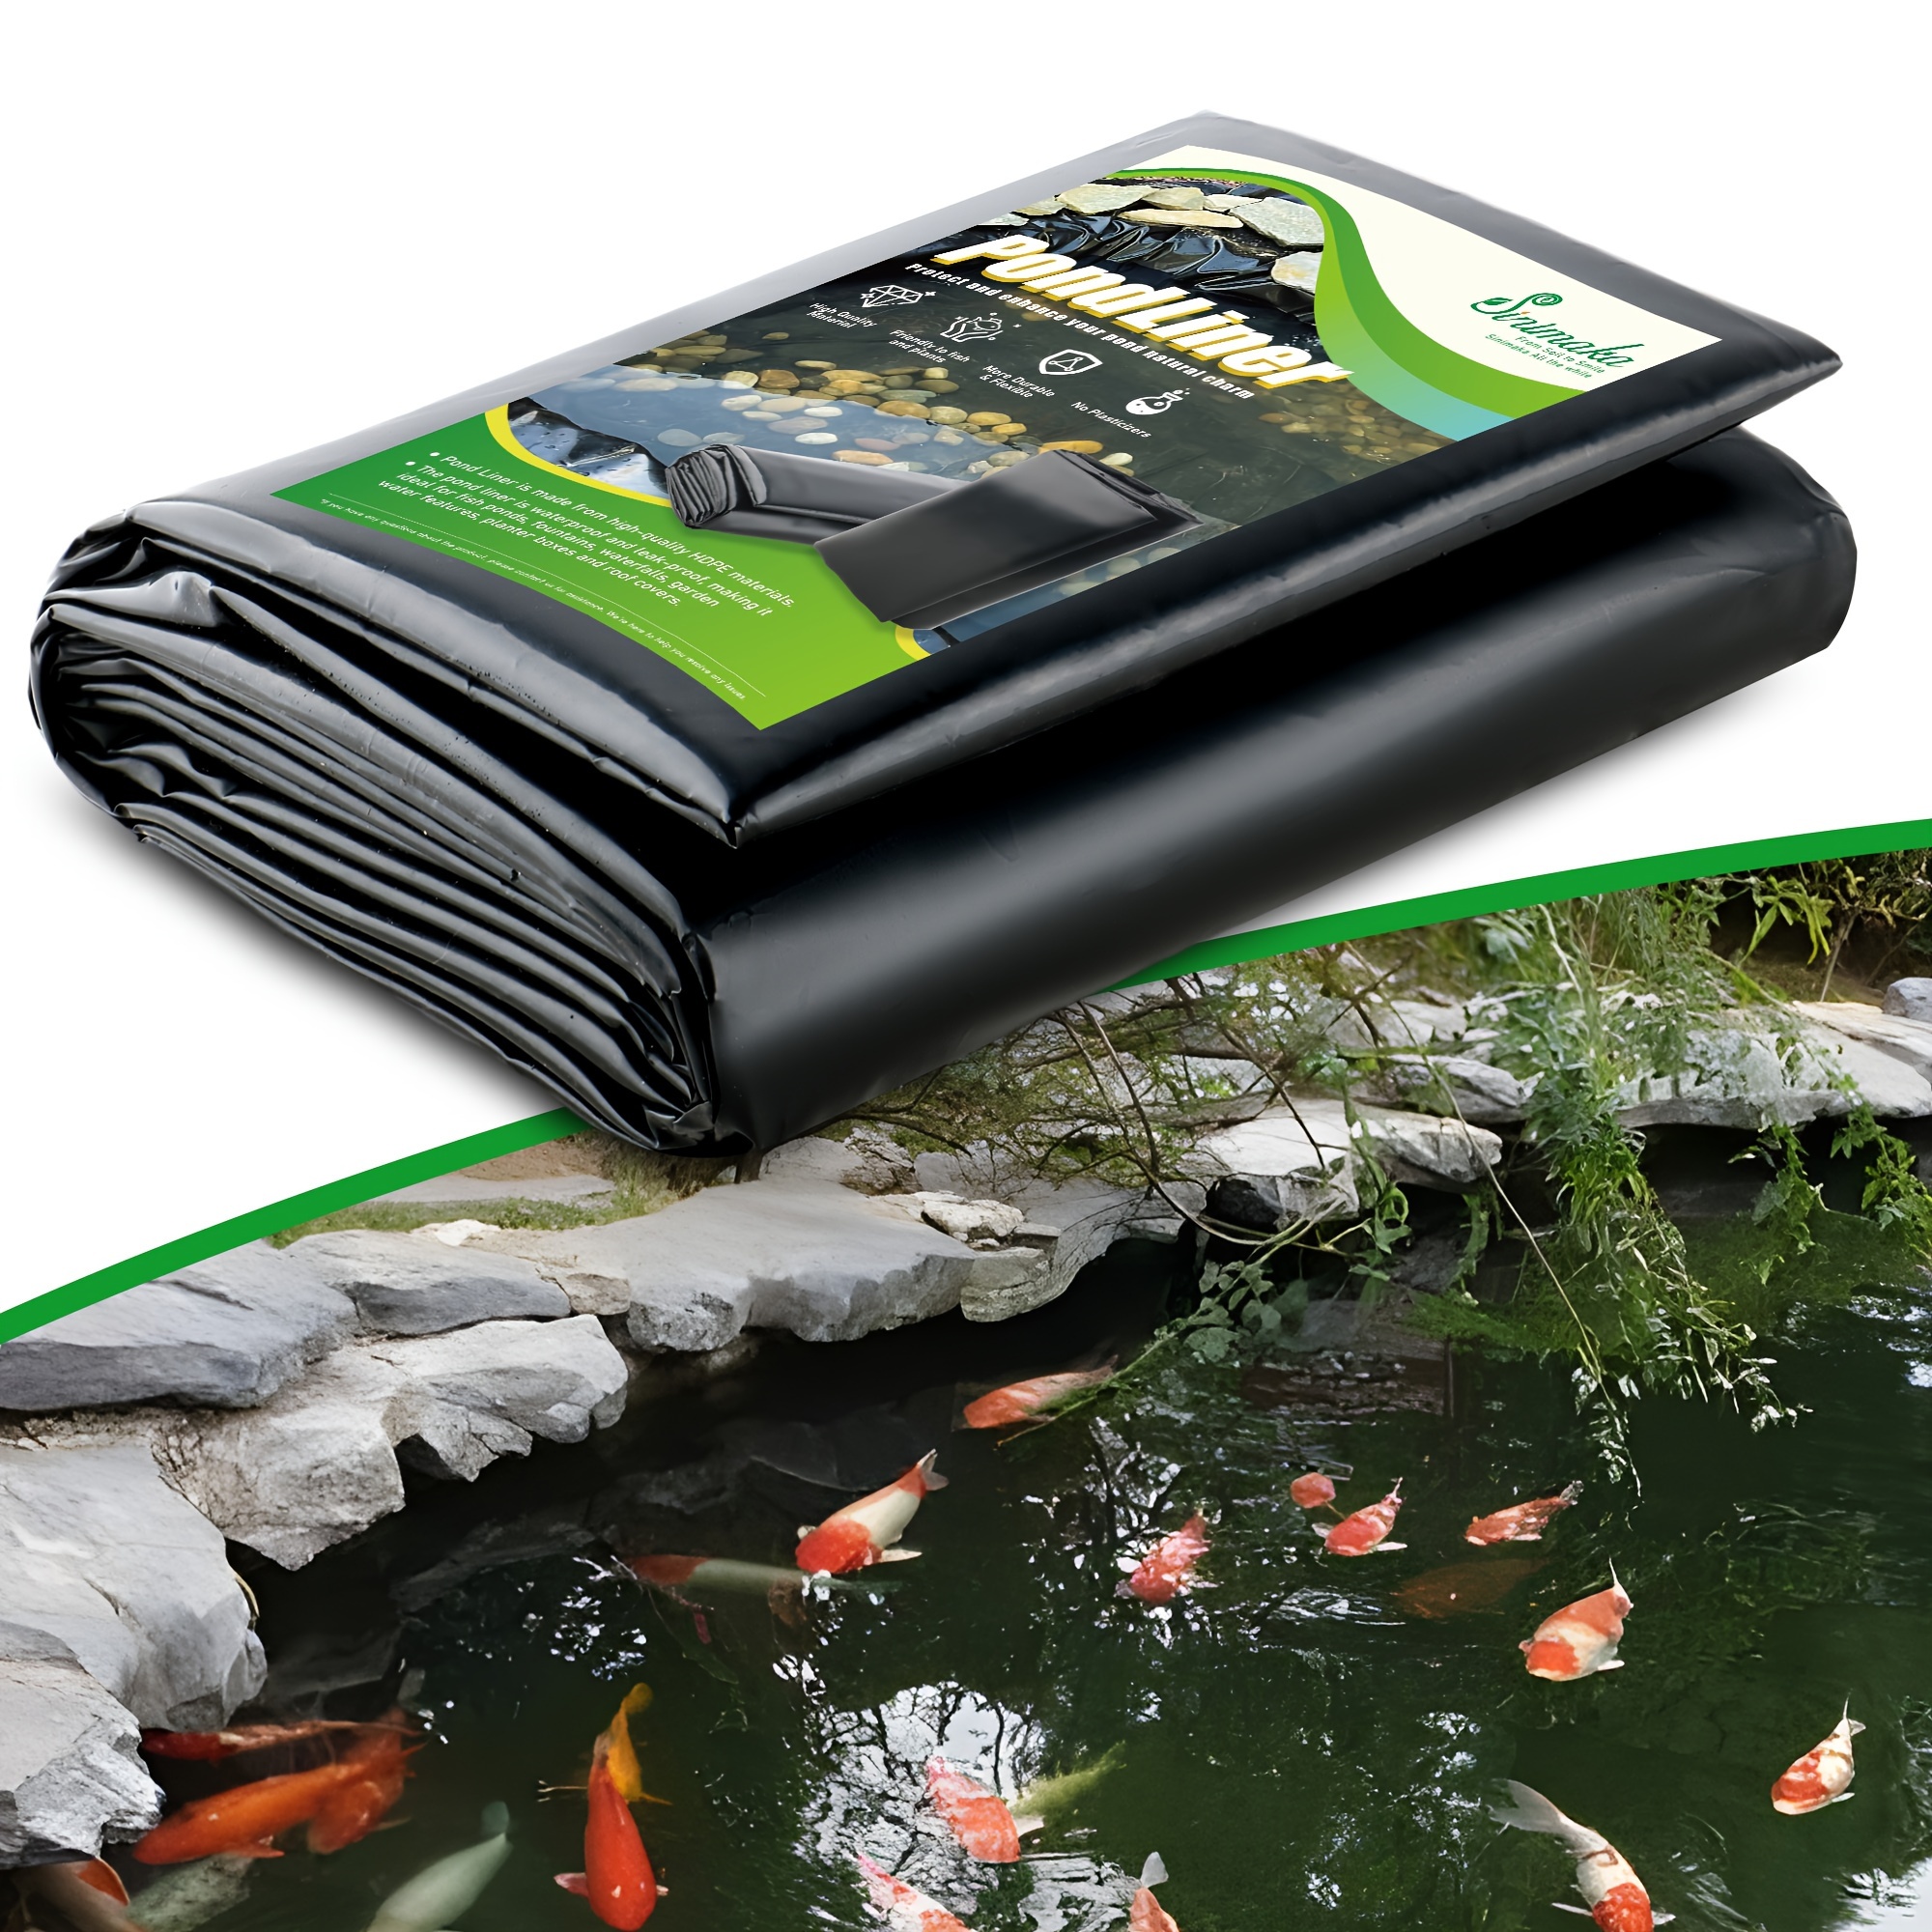 

1 Pc , 16.5ft X 20ft Hdpe Pond Liners For Outdoor Ponds, Pond Liners For Koi, Fish, , Fountain, Waterfall